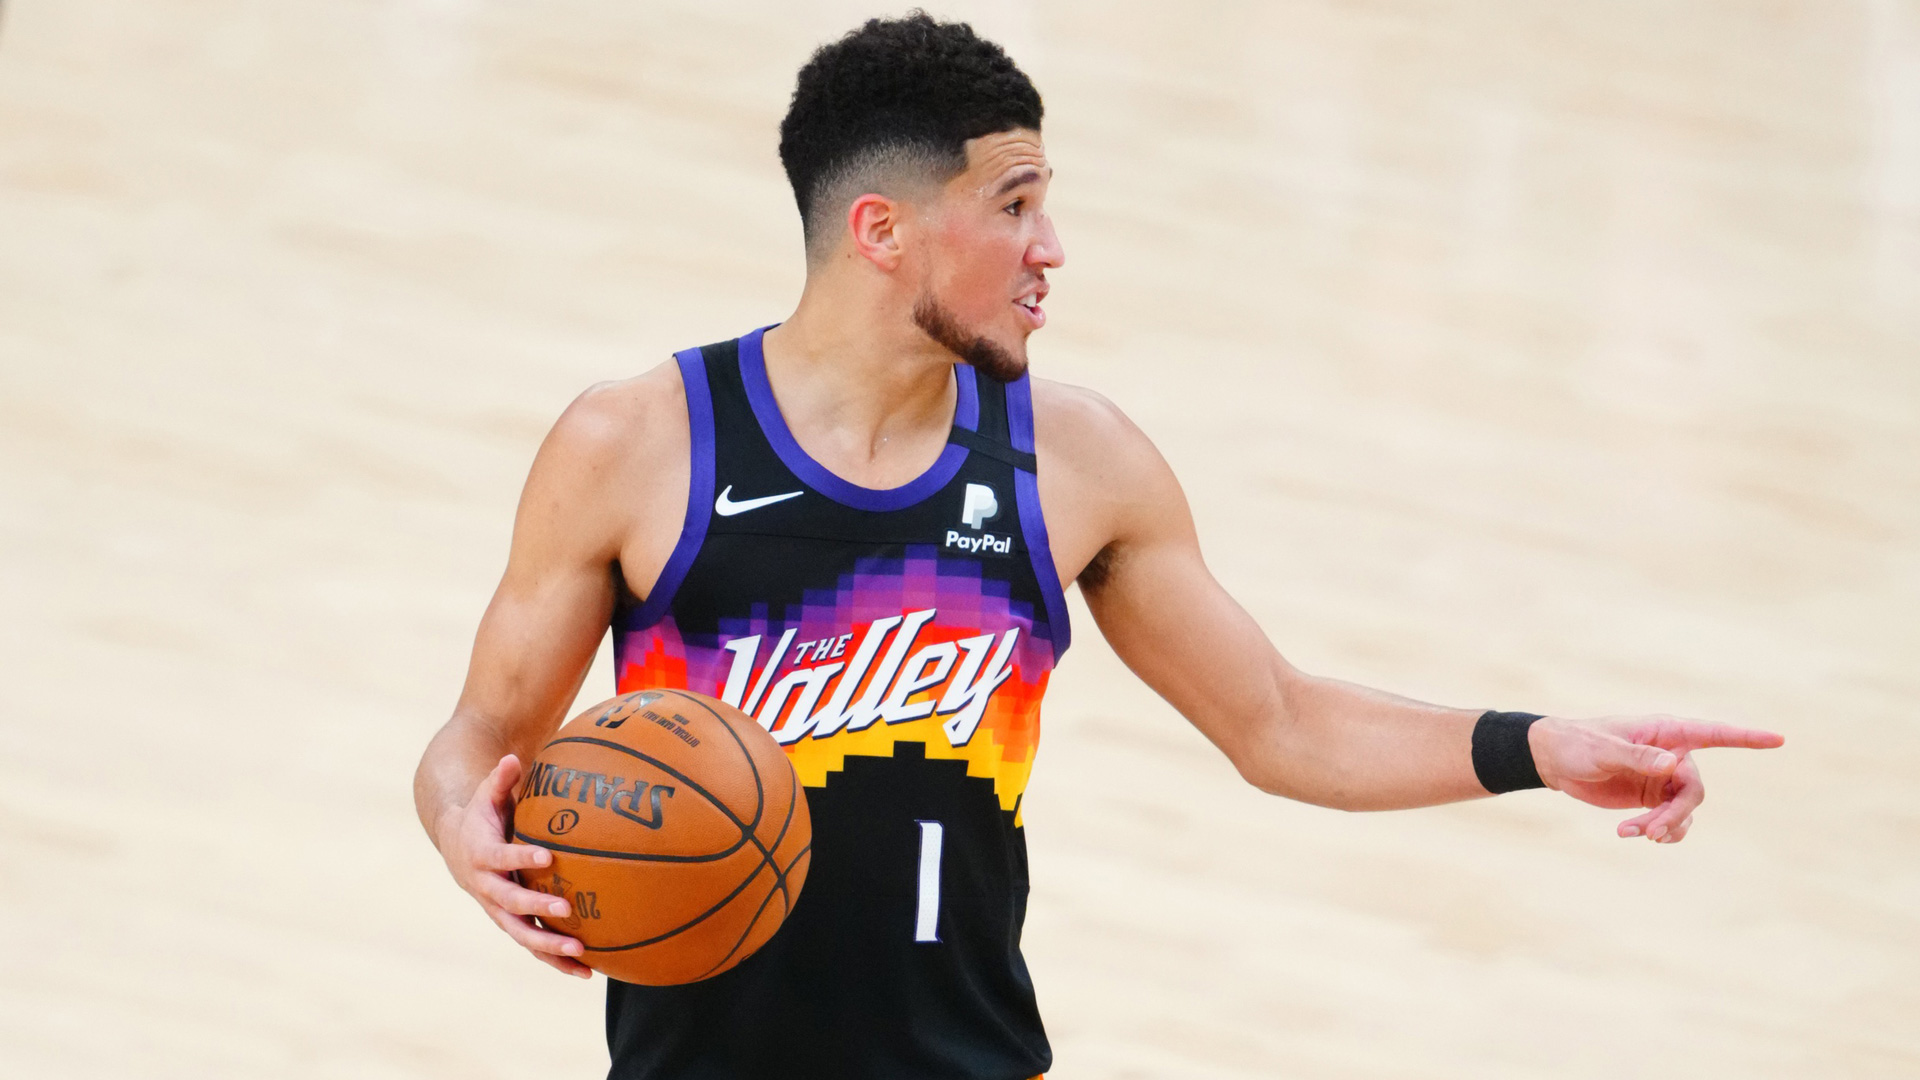 NBA City Jerseys 2022: Ranking Nike's efforts from worst to first